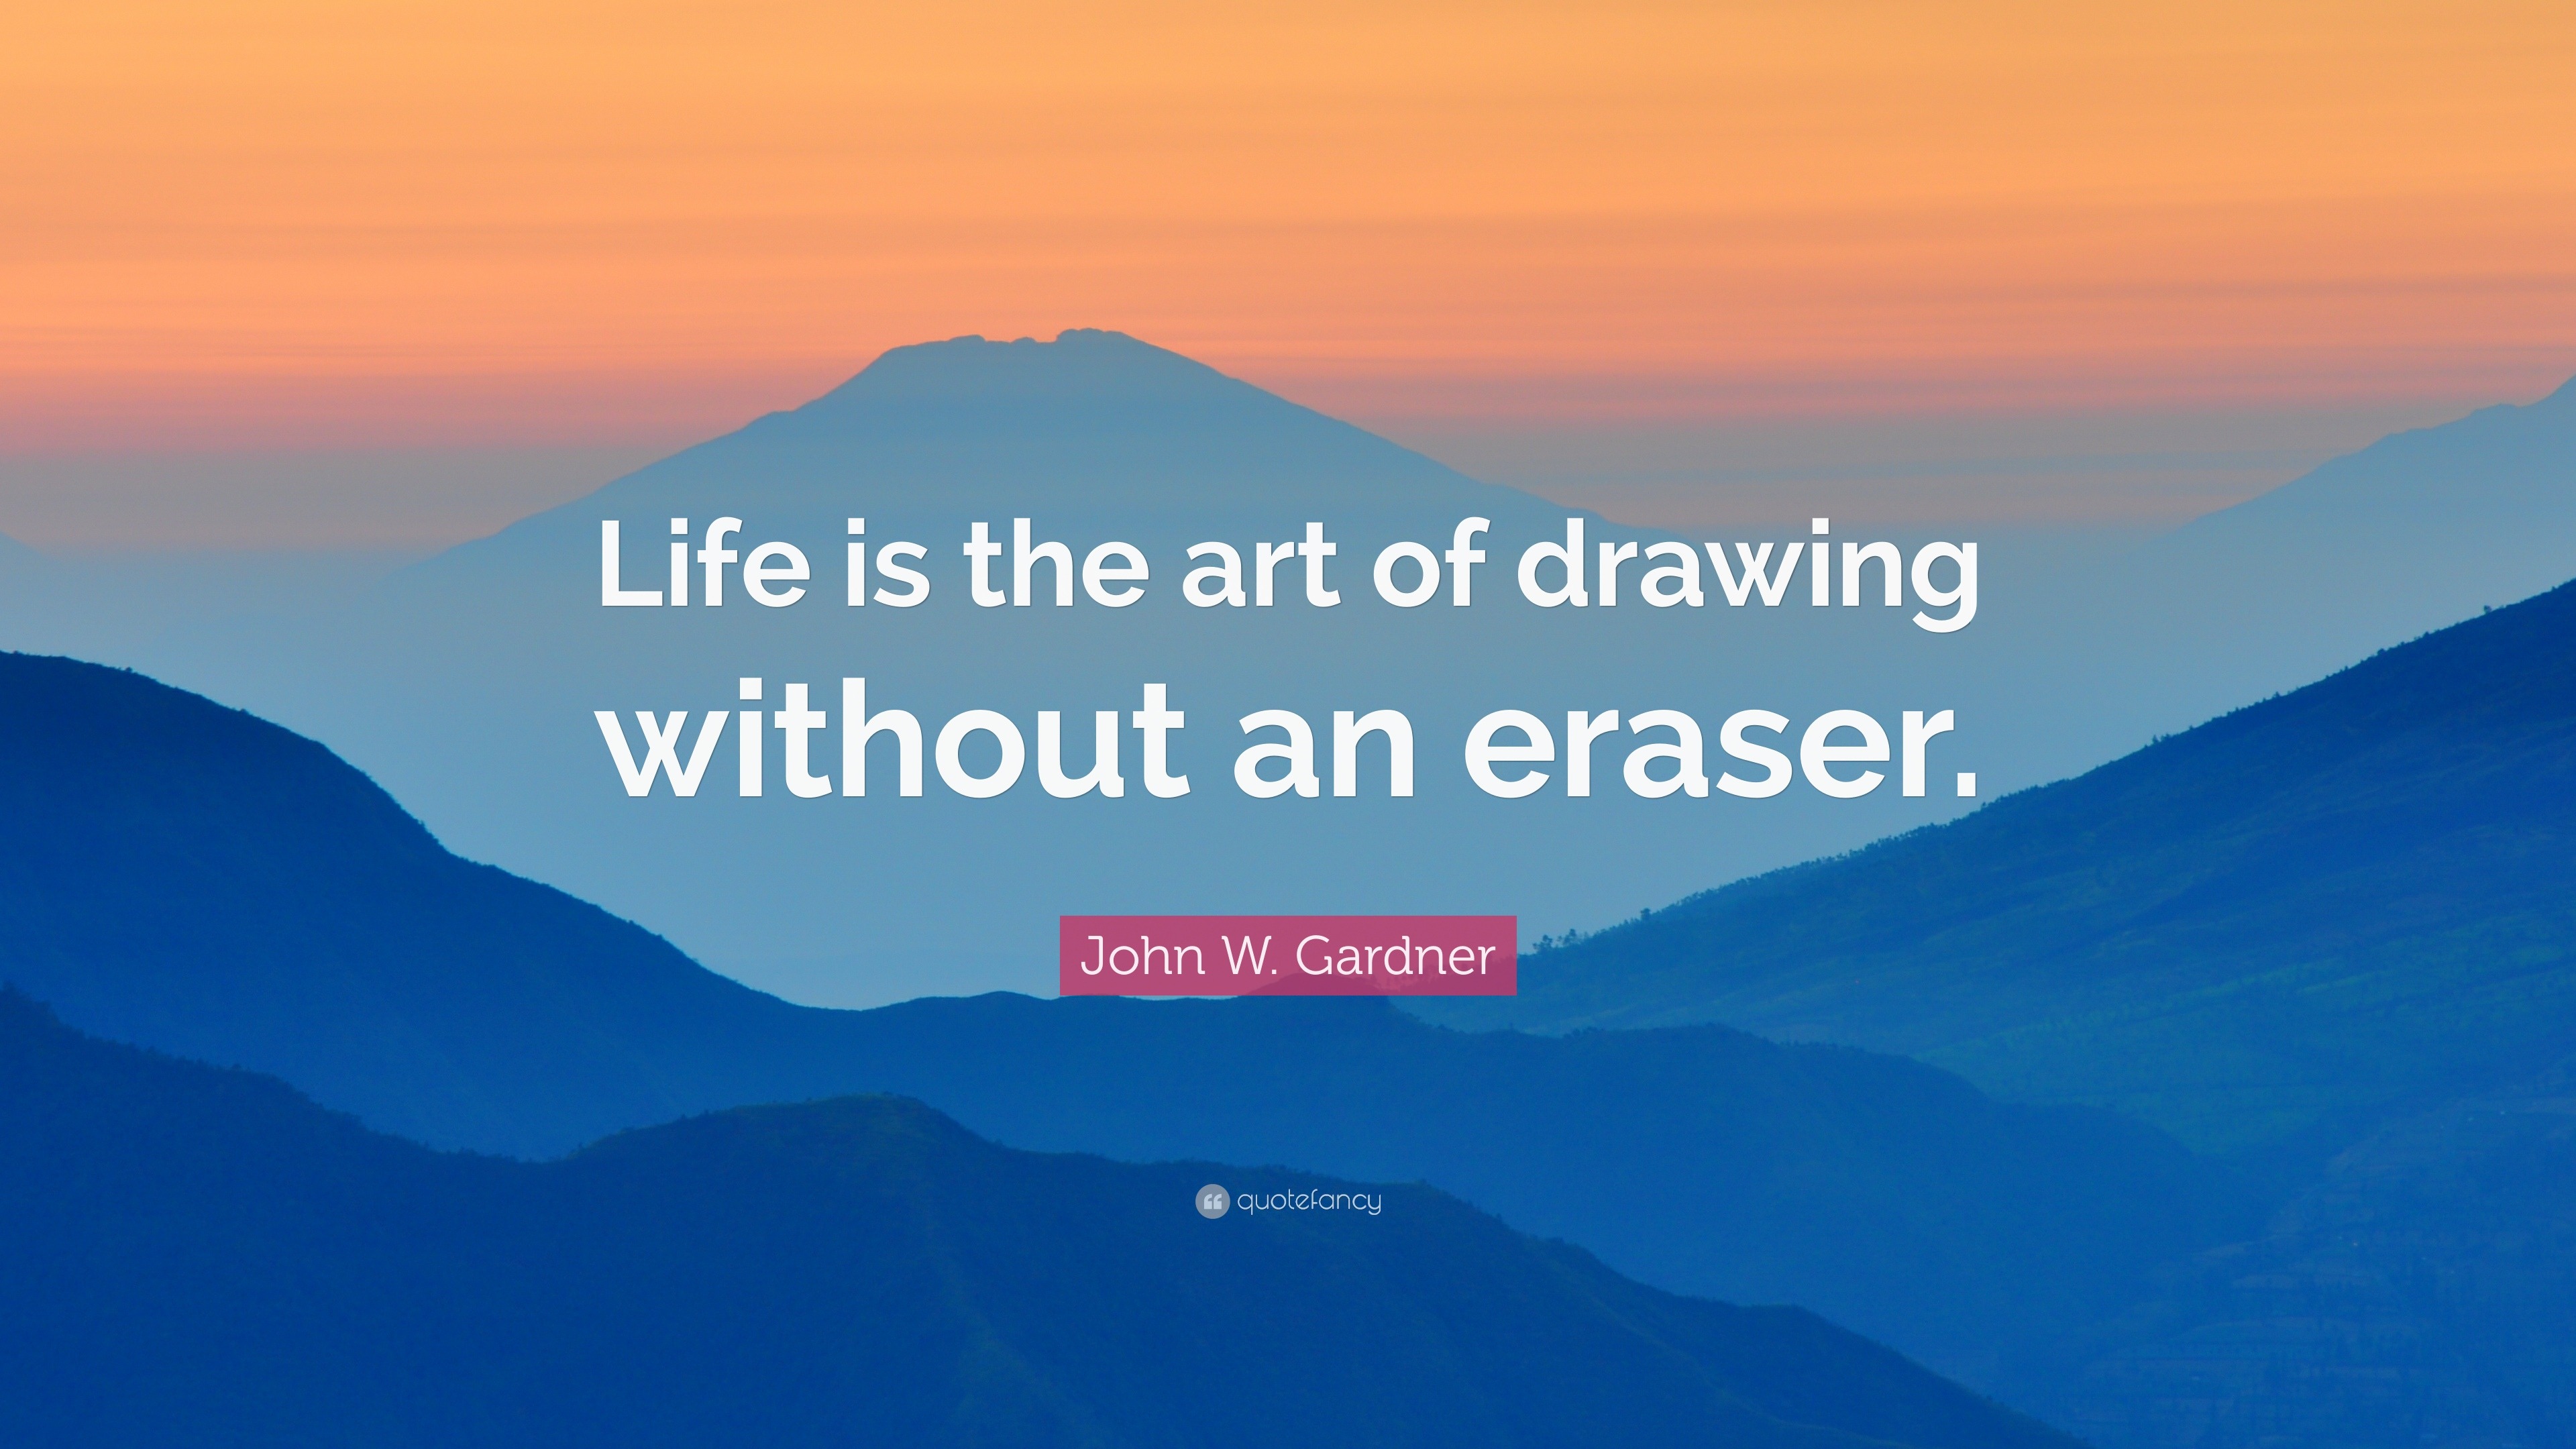 John W. Gardner Quote “Life is the art of drawing without an eraser.”